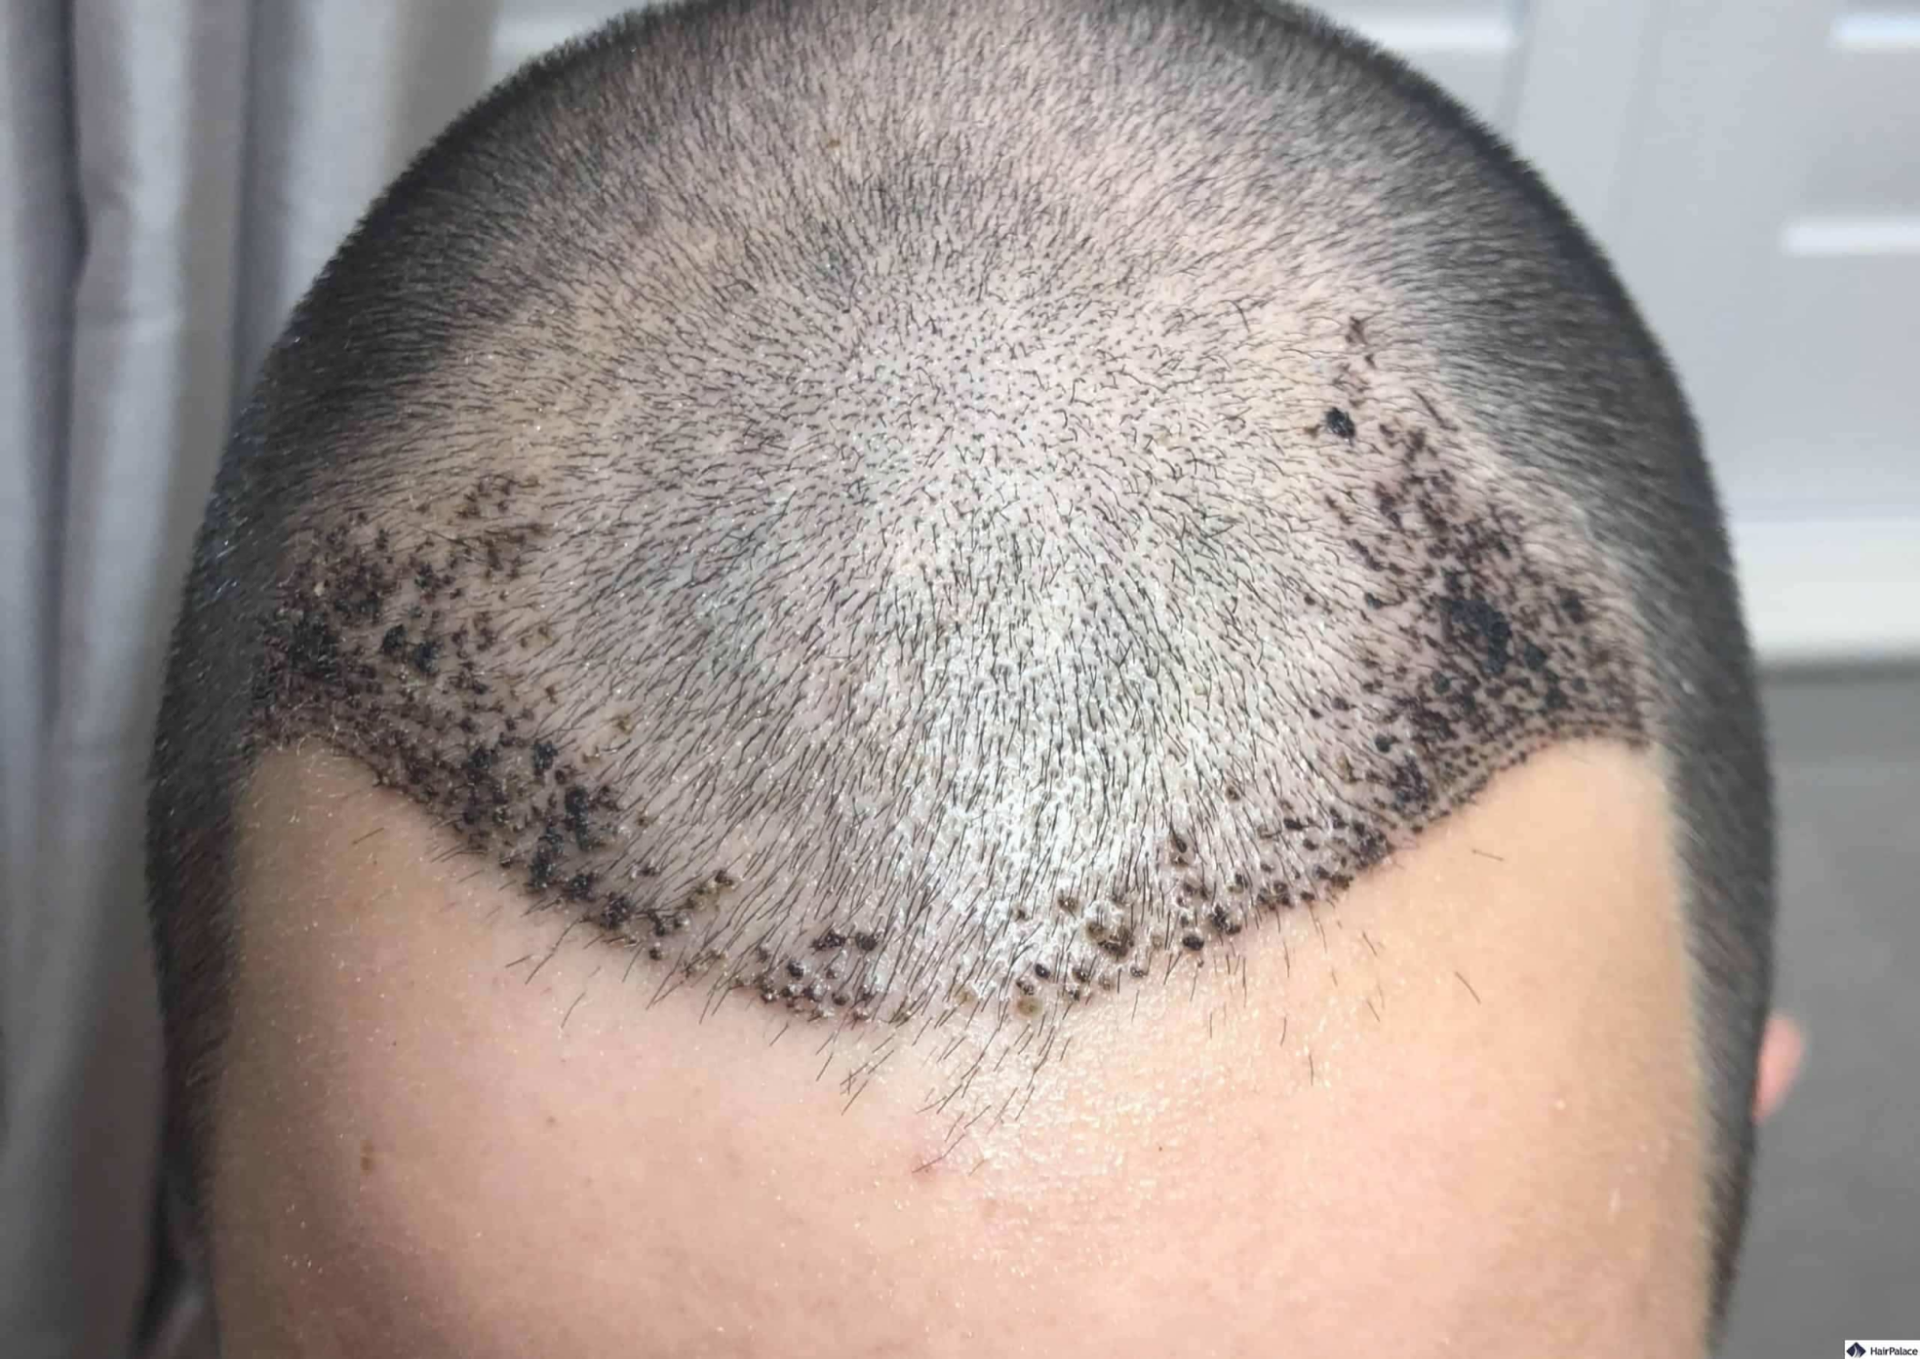 Scabs 7 days after a hair transplant